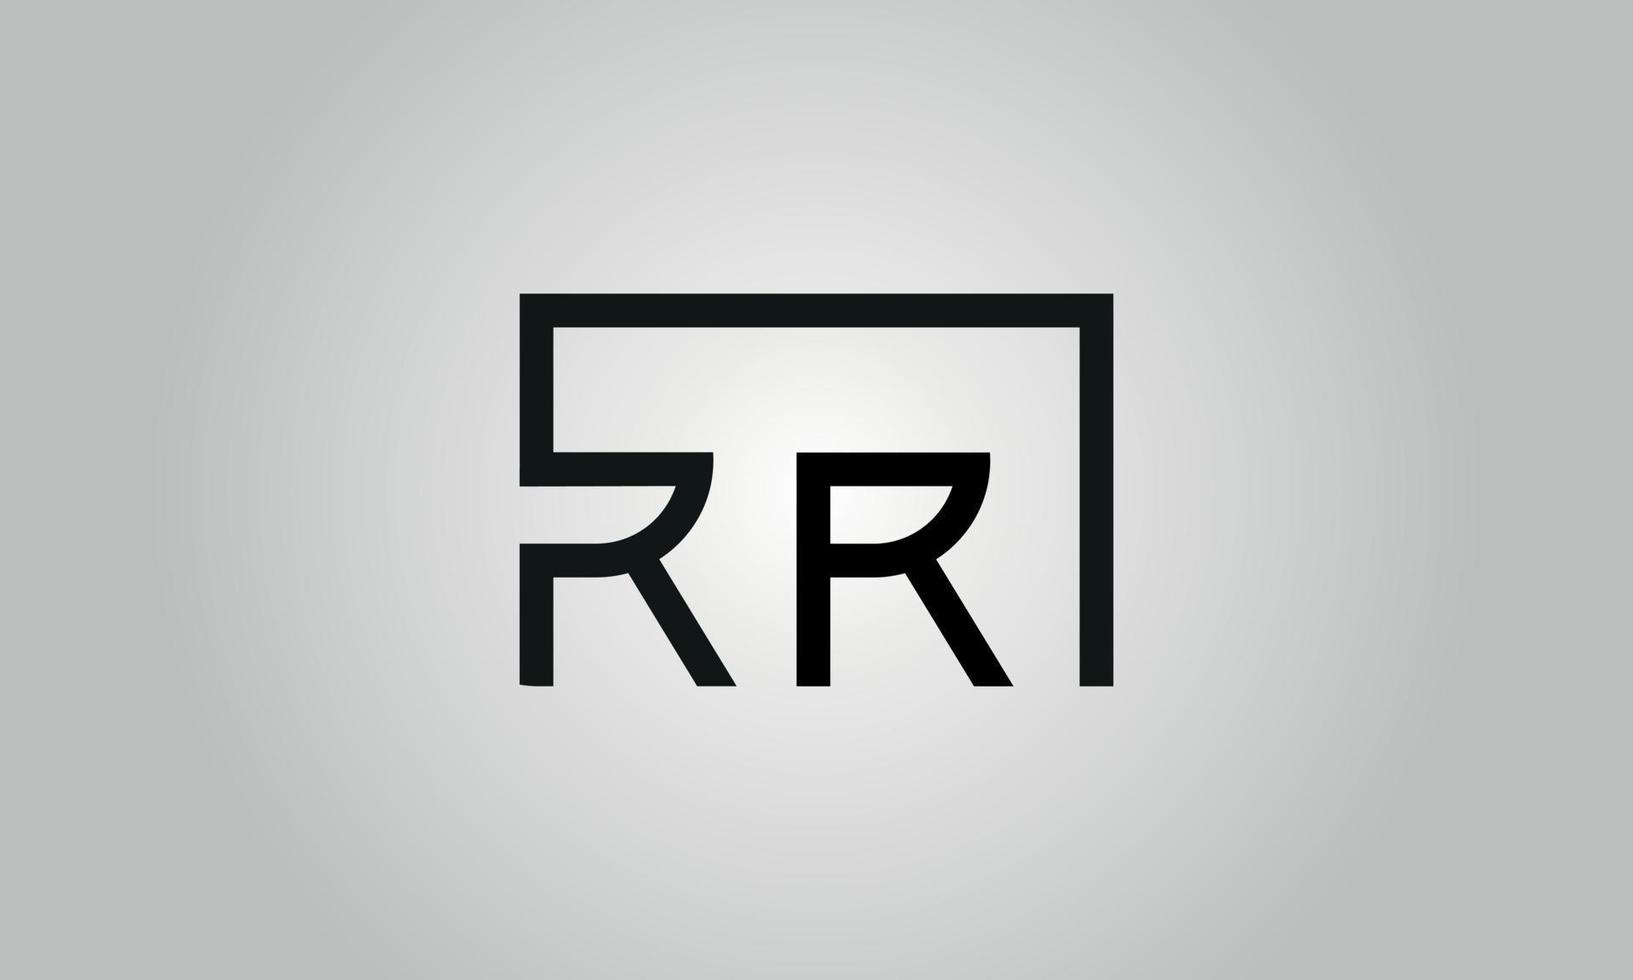 Letter RR logo design. RR logo with square shape in black colors vector free vector template.